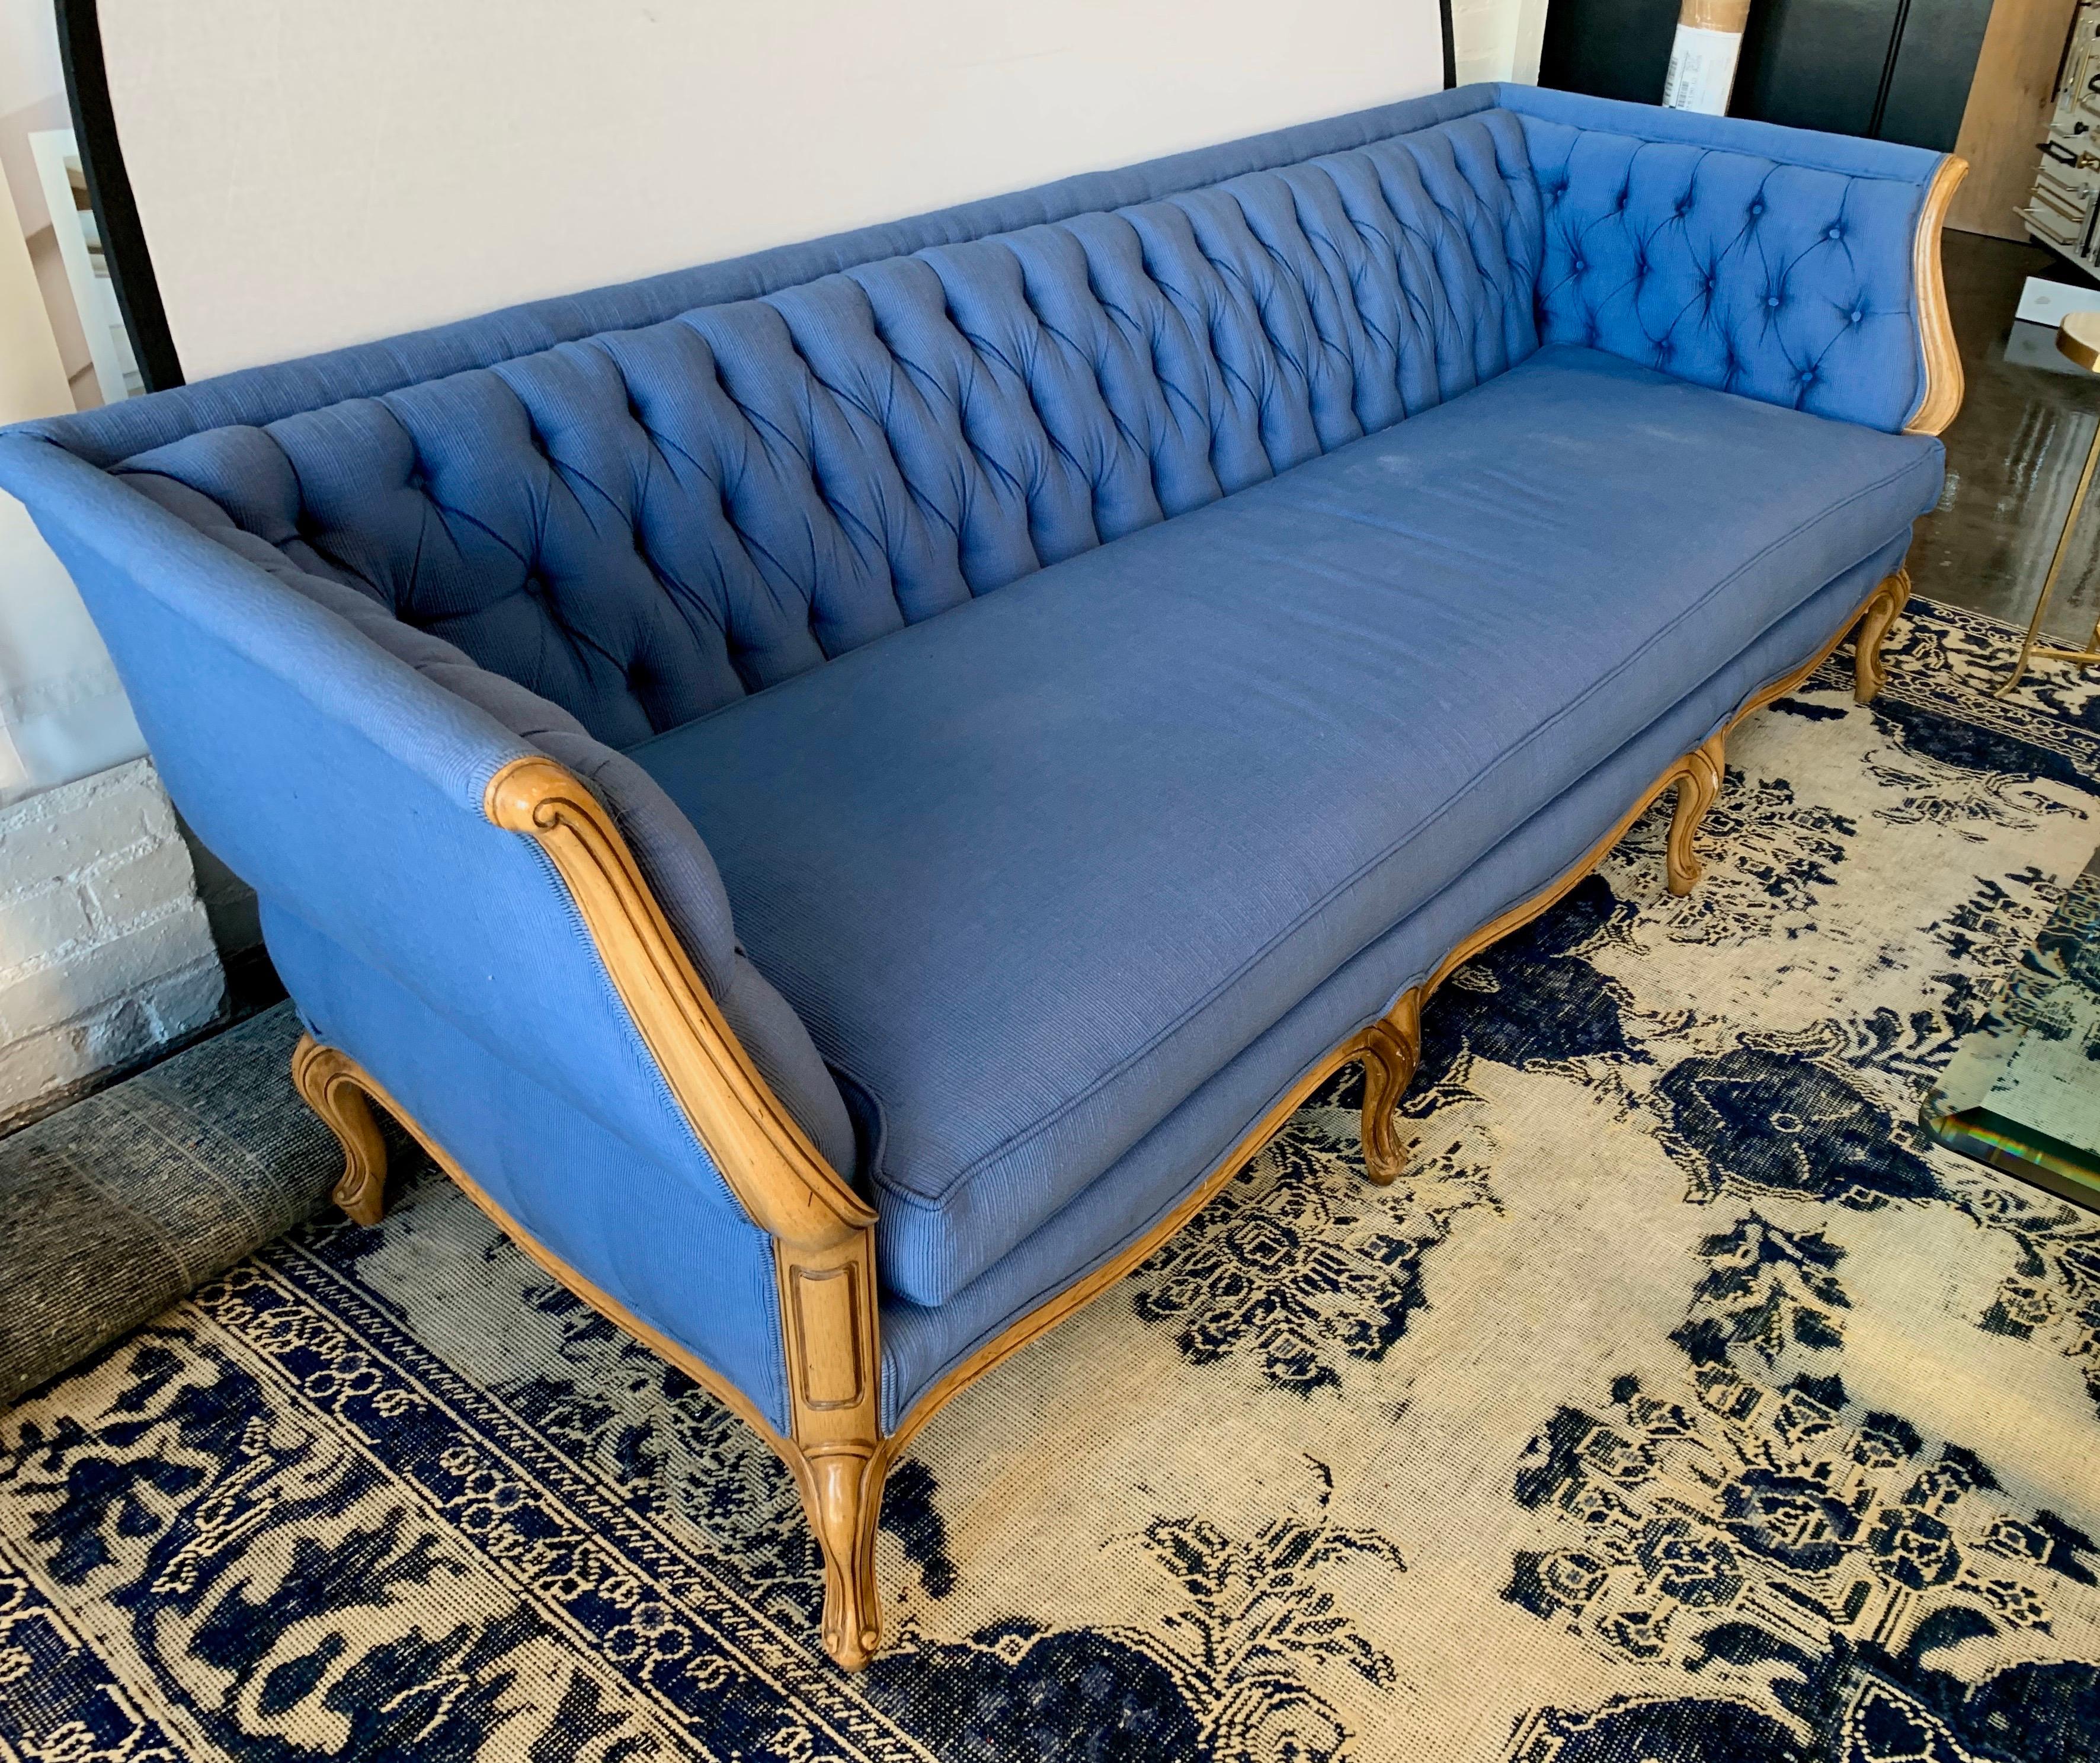 A beautiful vintage tufted sofa with a carved fruit wood frame. Tufted on back and inside arms. Newer cotton upholstery in the Pantone blue color of 2020. It has a subtle raised ribbed pattern. Down seat cushion.